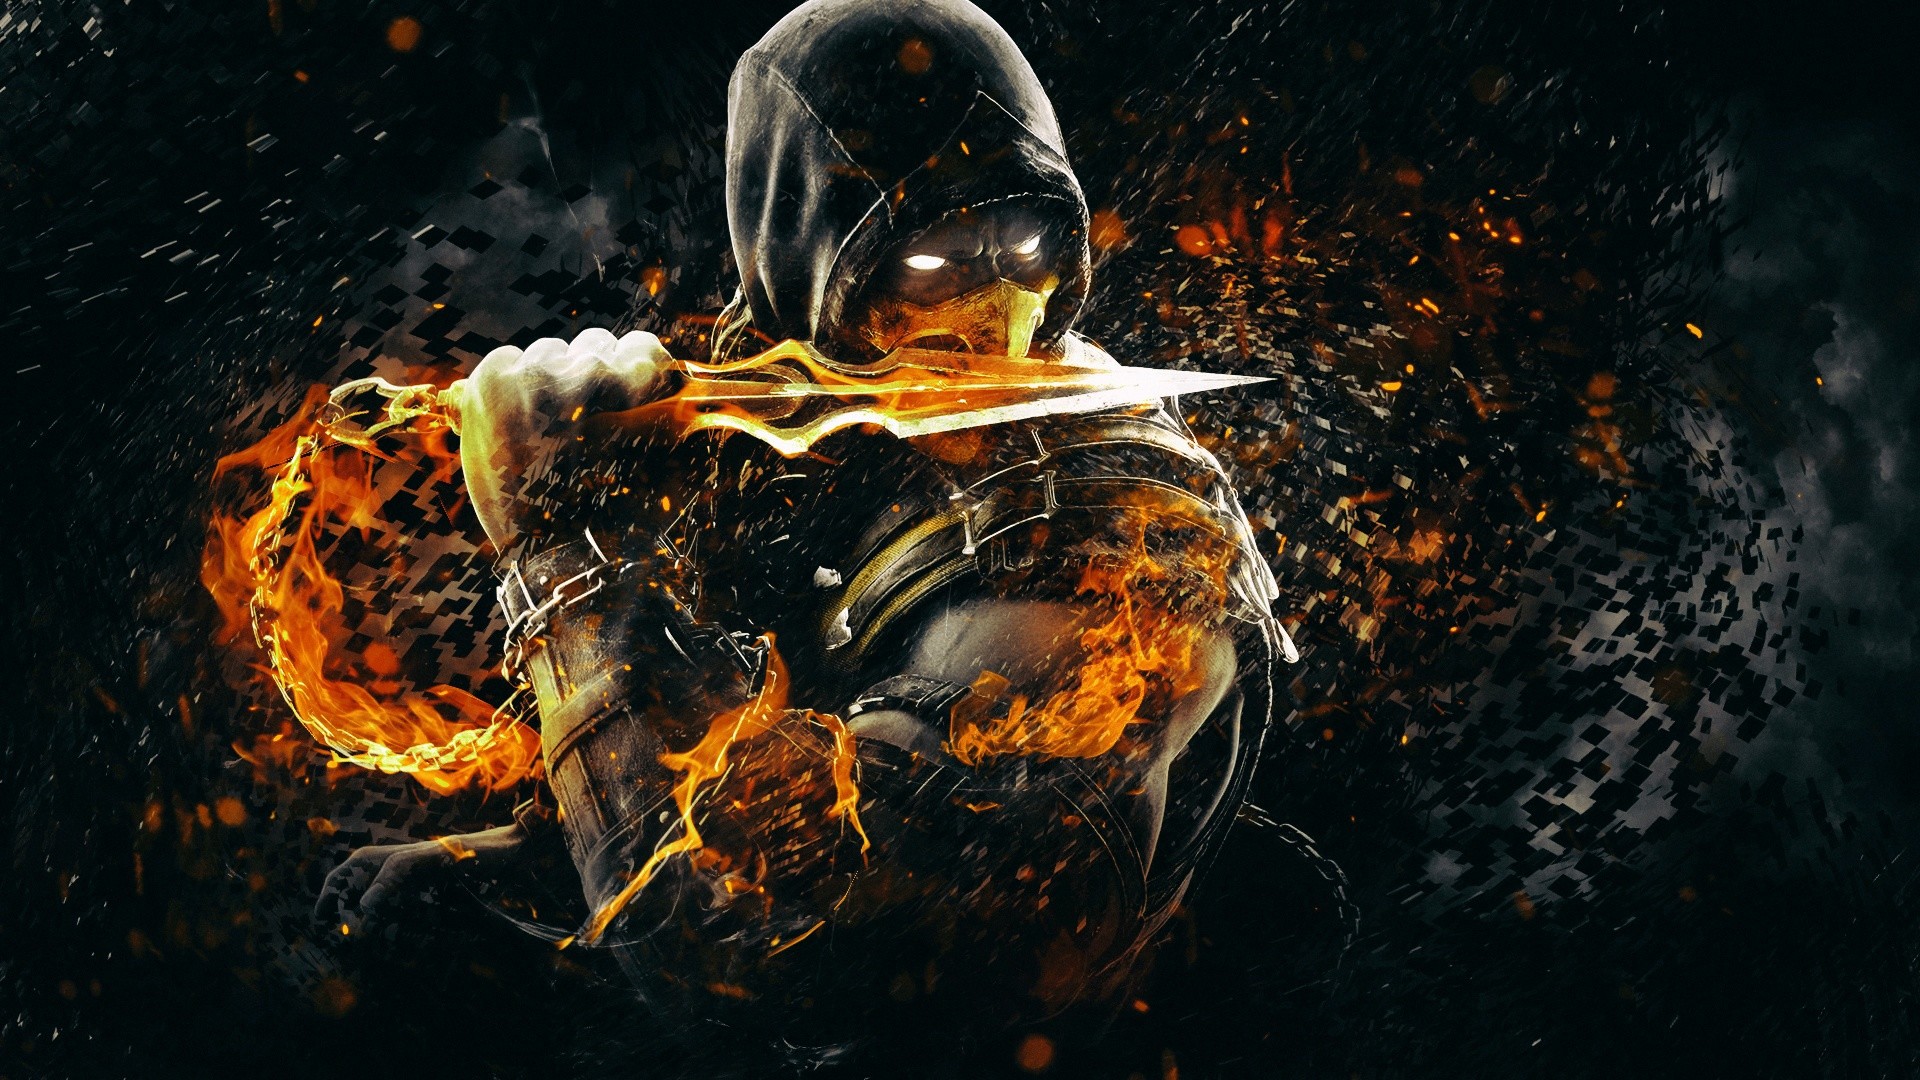 1920×1080 Tremor From Mortal Kombat X Need #iPhone S #Plus #Wallpaper / #Background for #IPhone6SPlus Follow iPhone 6S Plus 3Wallpapers / #Backg